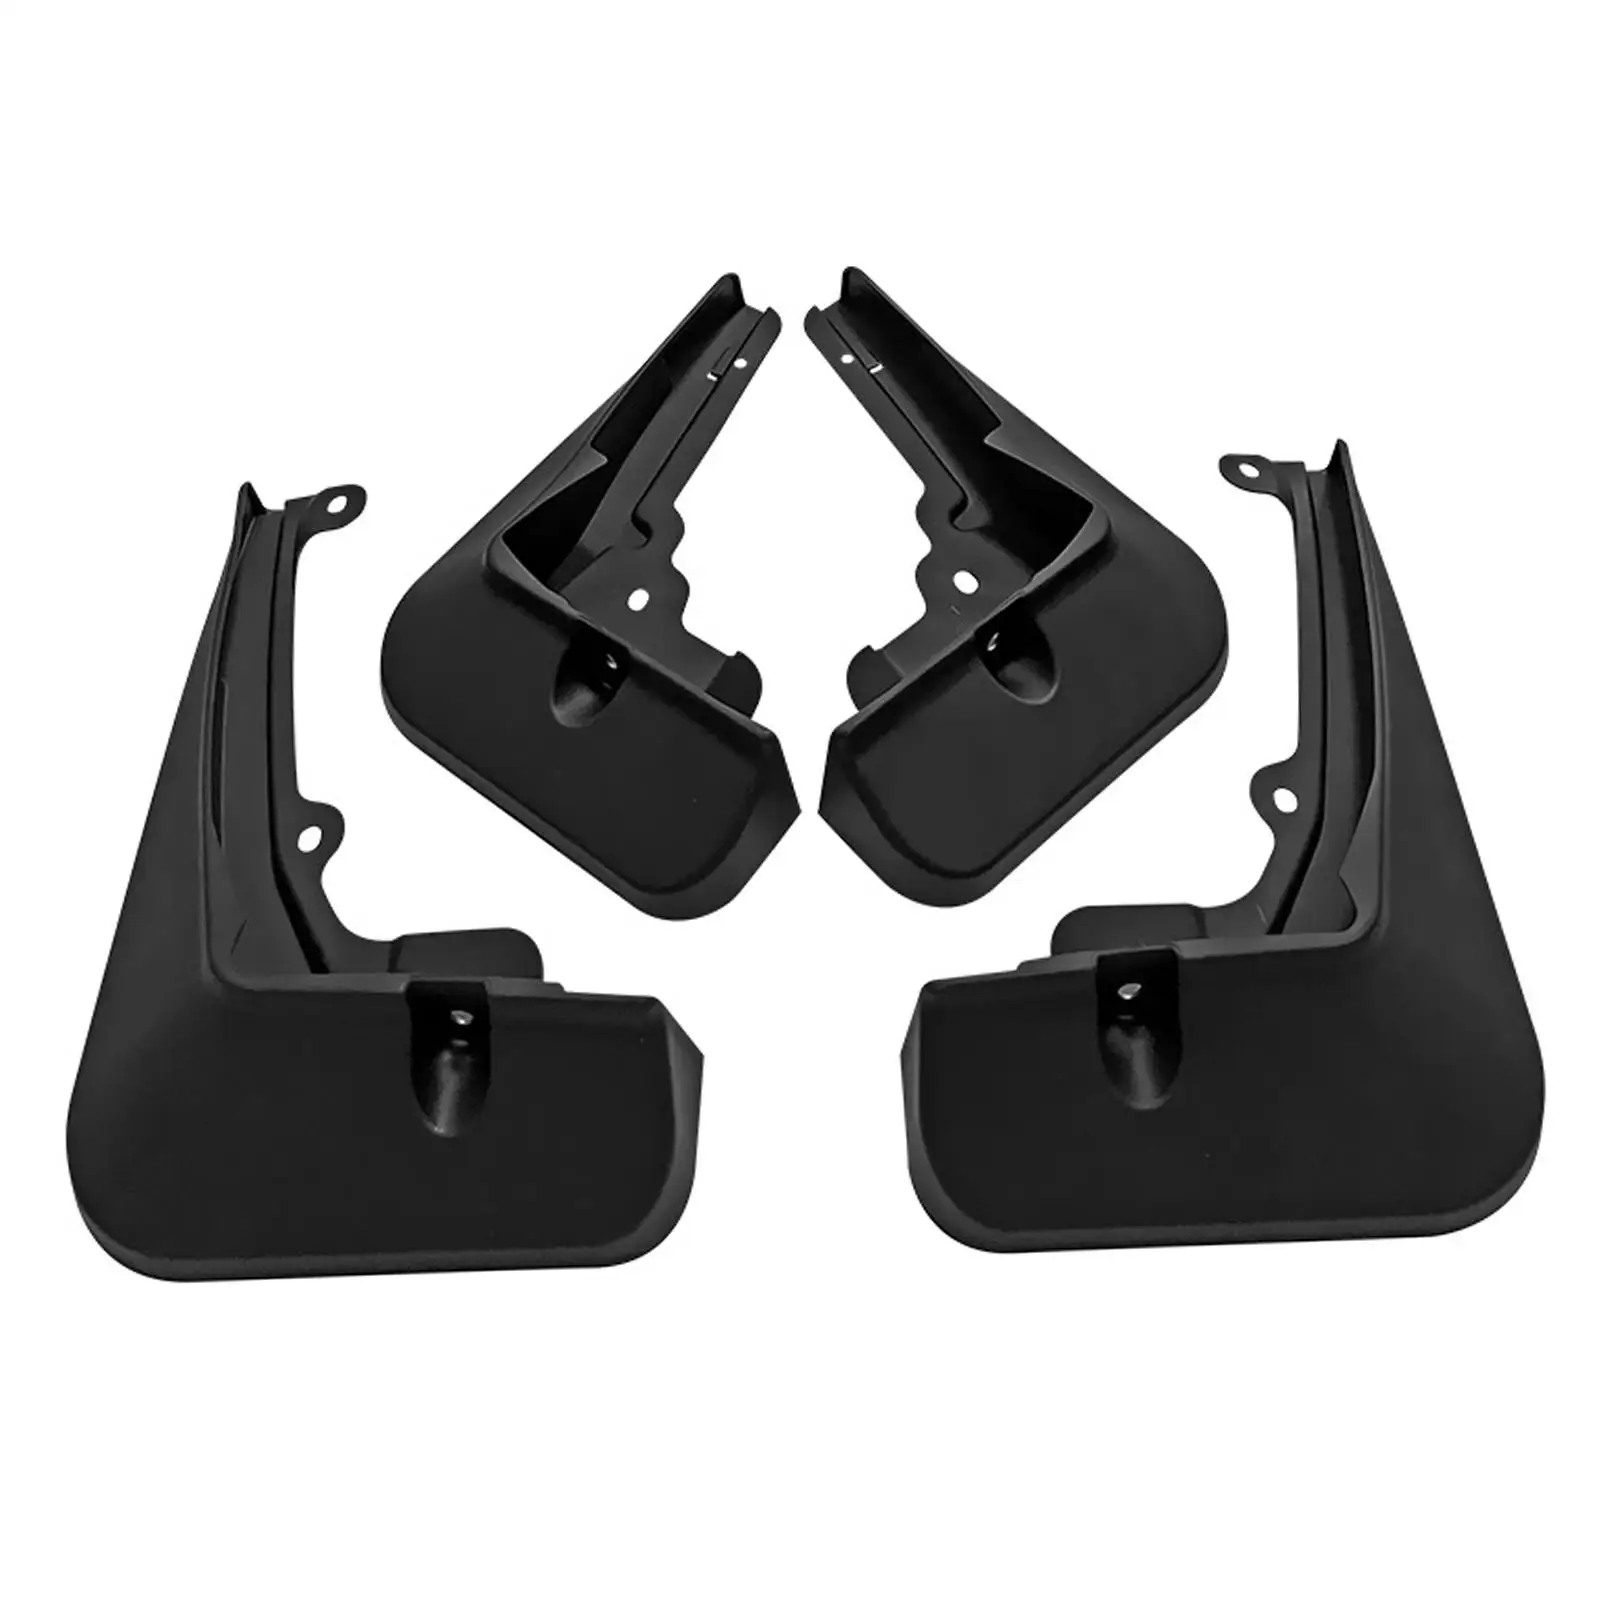 4x Car Mudguard Front Rear Muds Guard Flap Fenders for Byd Seal 2022